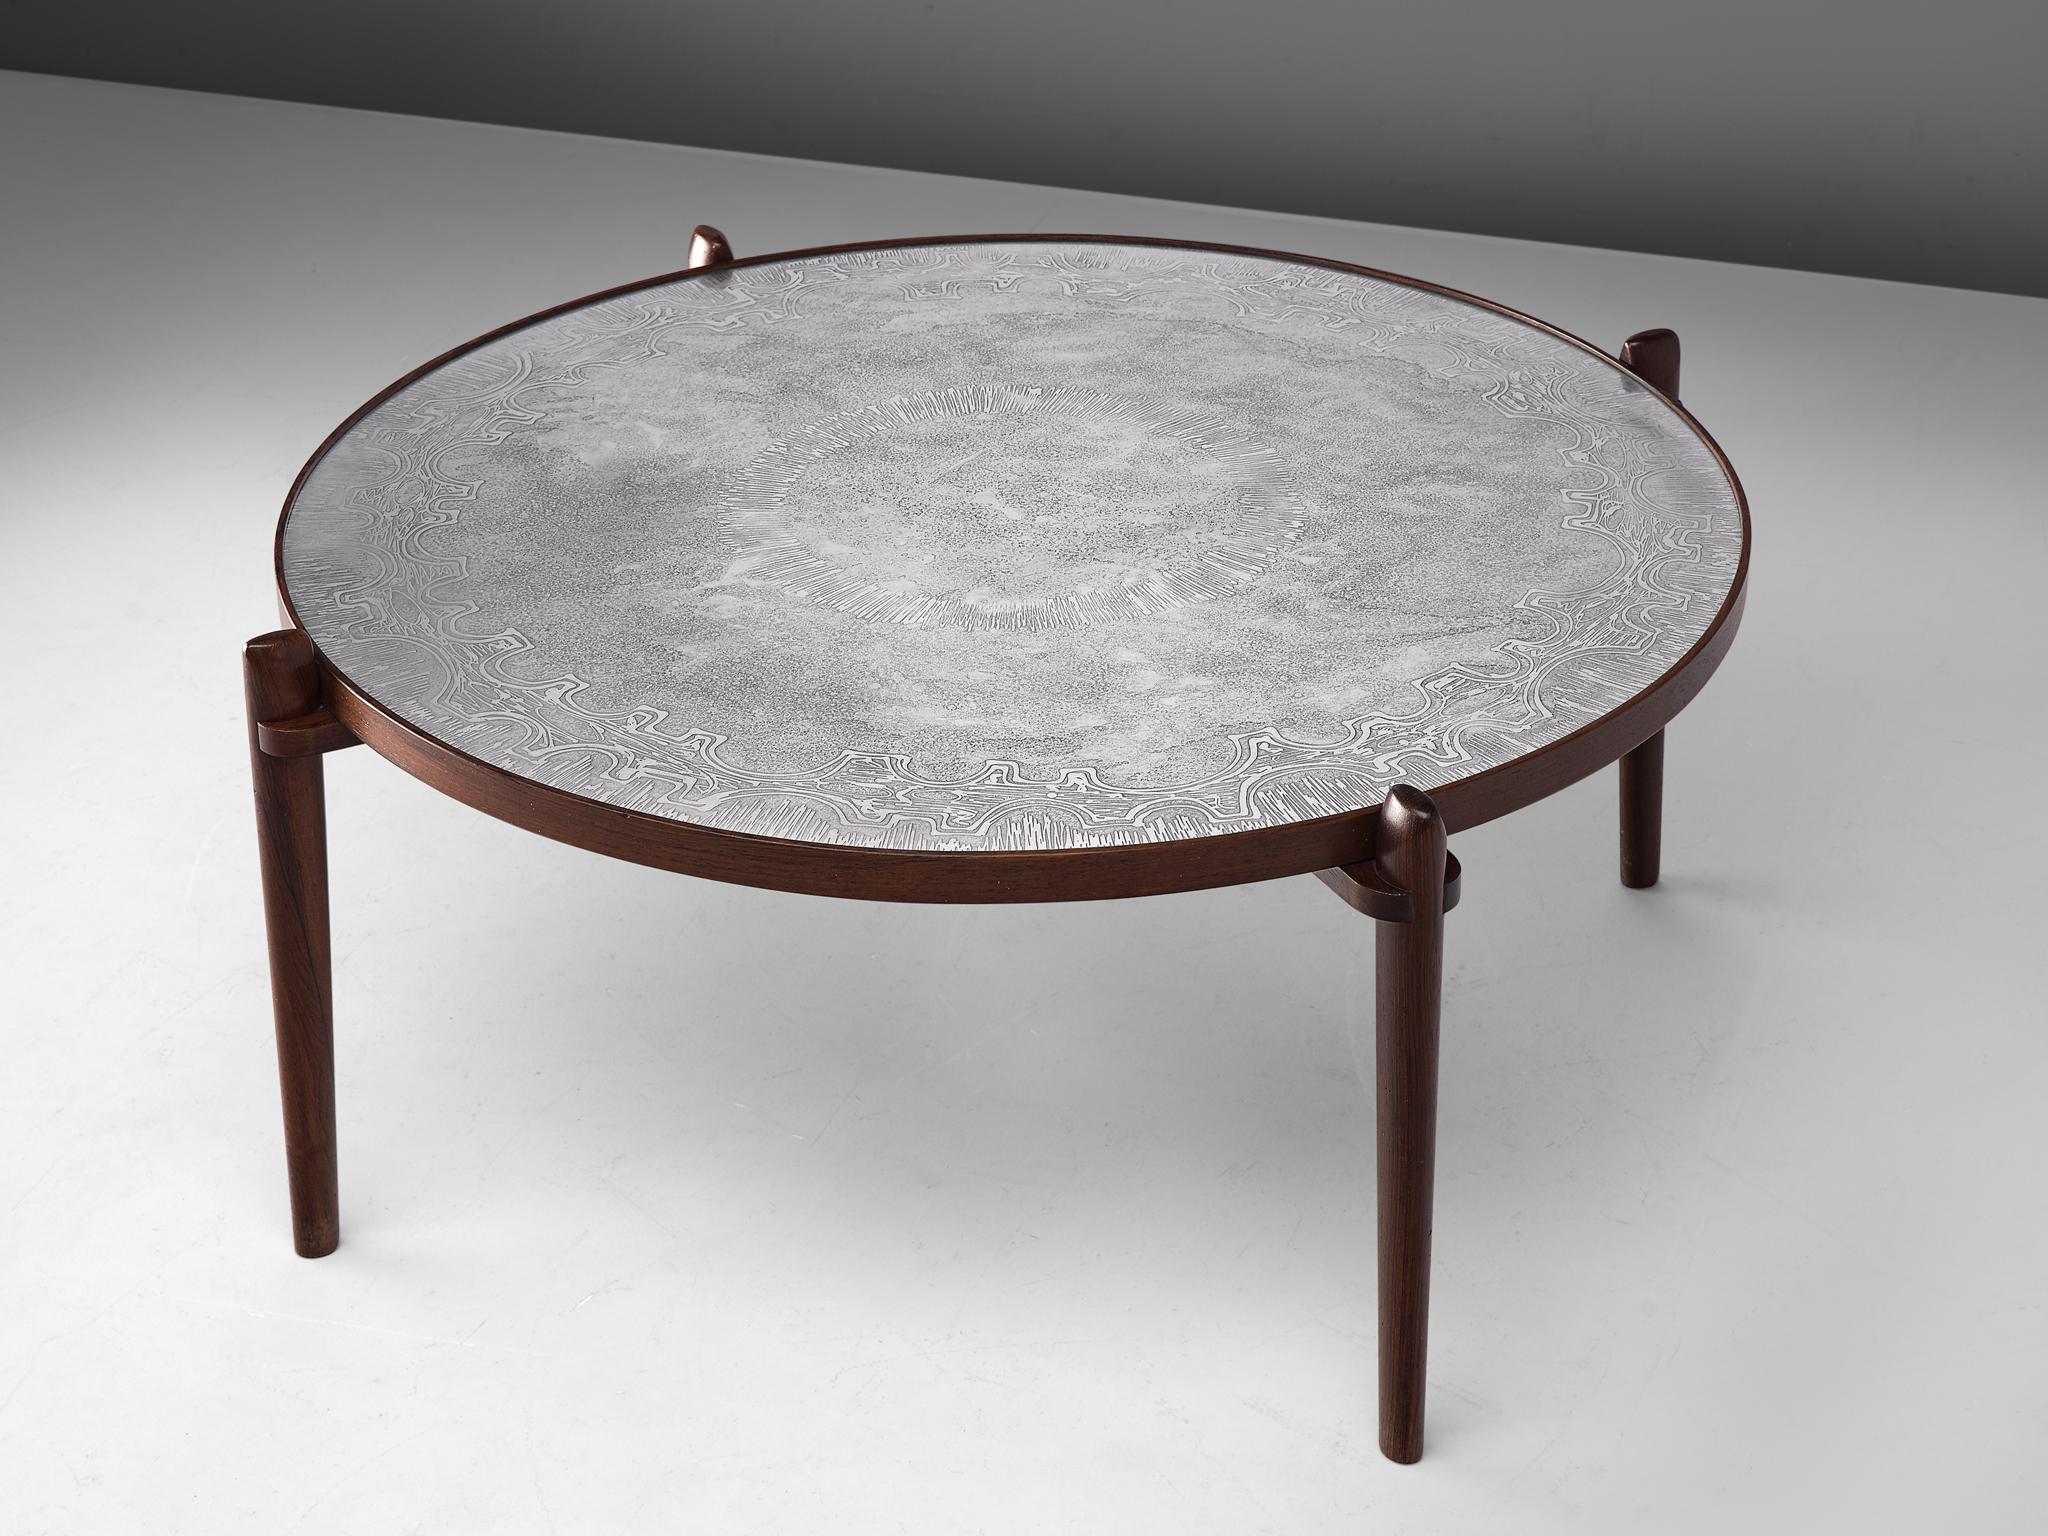 Heinz Lilienthal, coffee table, teak and steel, Germany, 1960s.

Circular coffee table designed by German Heinz Lilienthal. The elegant patterned etched tabletop is executed in steel, inlayed in a wooden edged base. The legs placed outside the